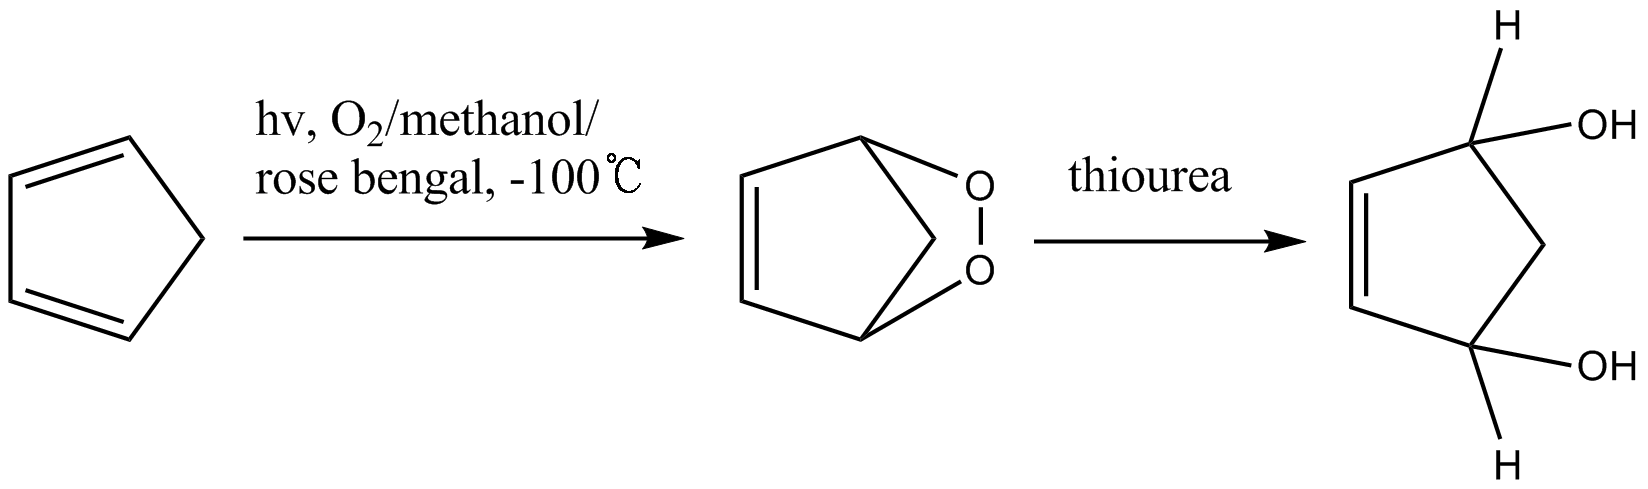 reduction of cyclic peroxide